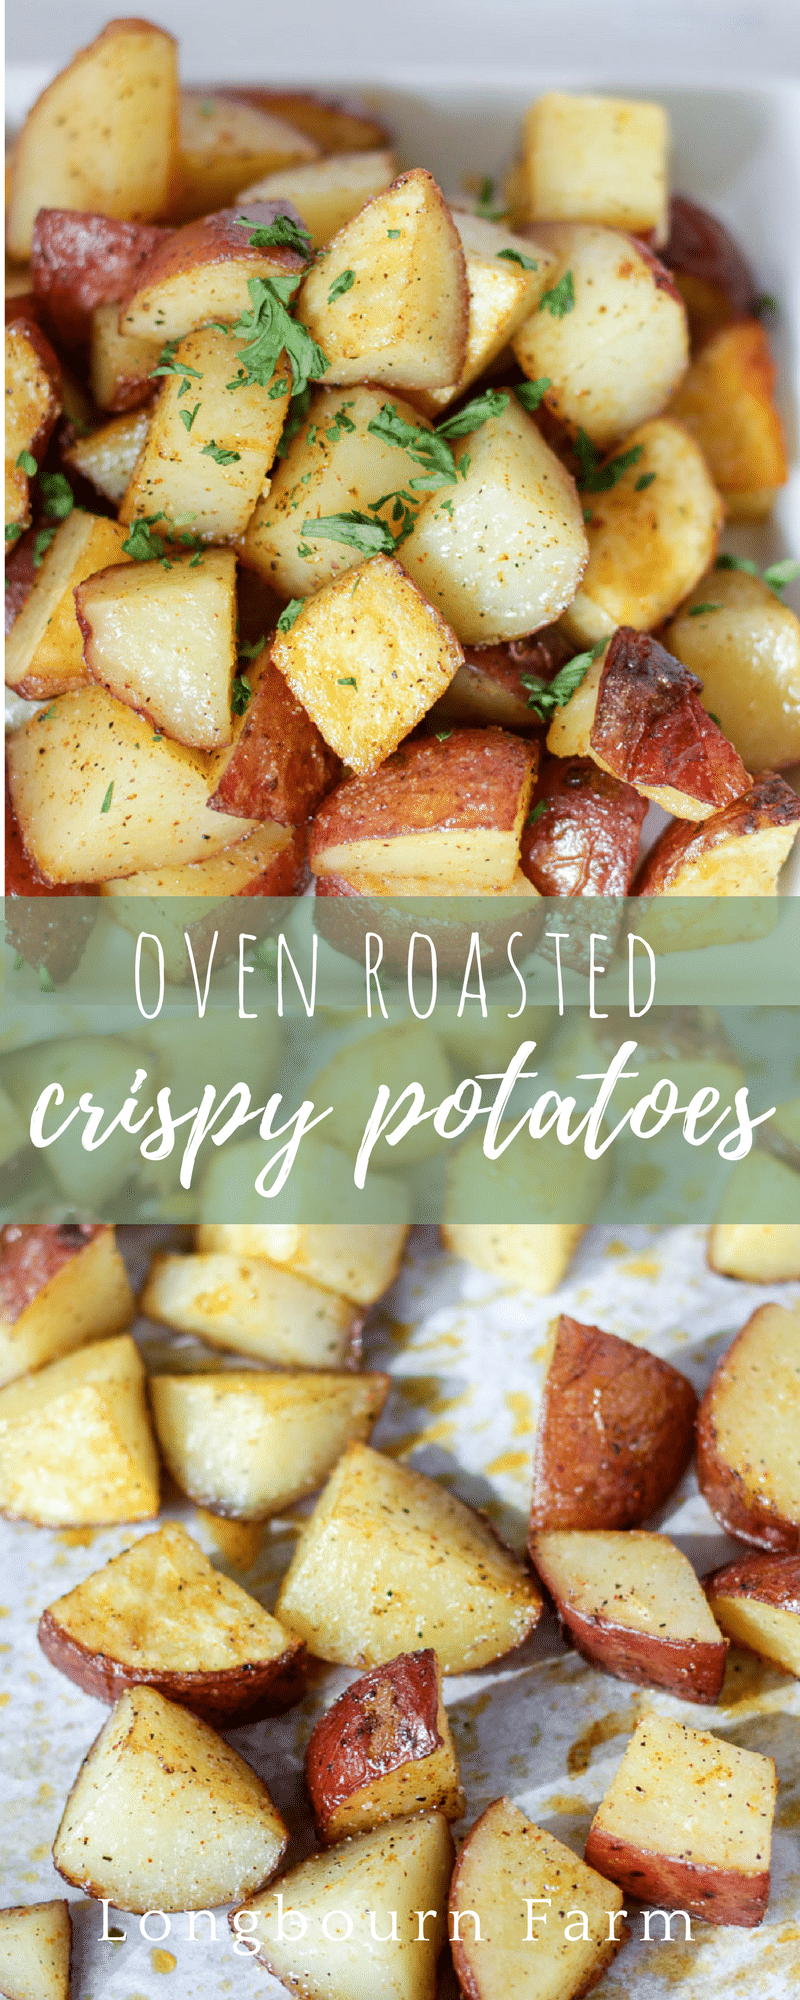 Crispy roasted potatoes are the perfect easy side dish to any meal! Crispy and flavorful on the outside and creamy and soft inside. Heaven!!!